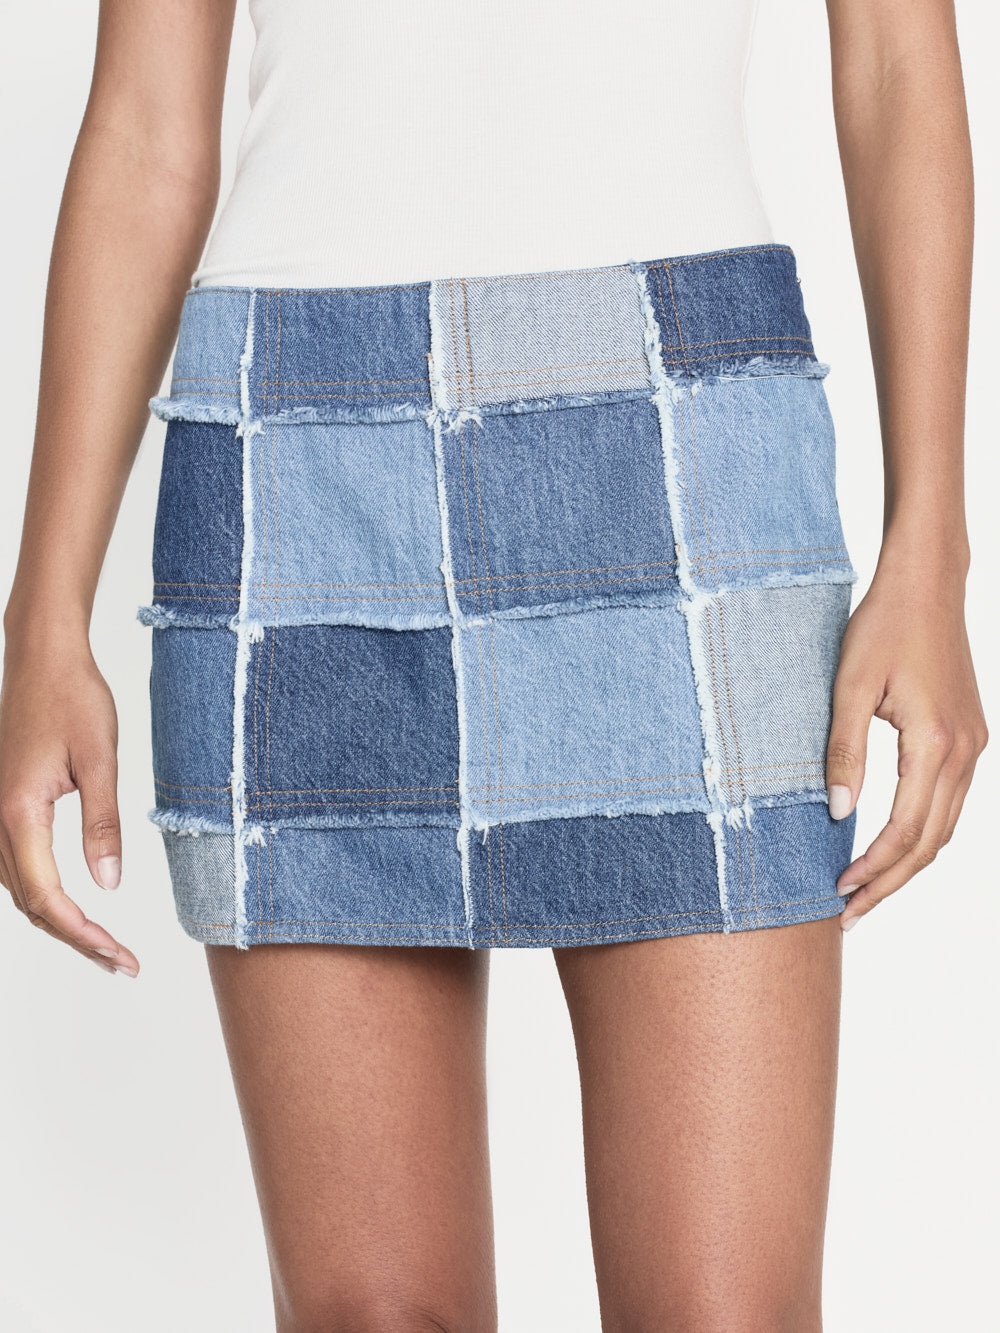 The 70's Patchwork Mini Skirt in Road Trip - 6